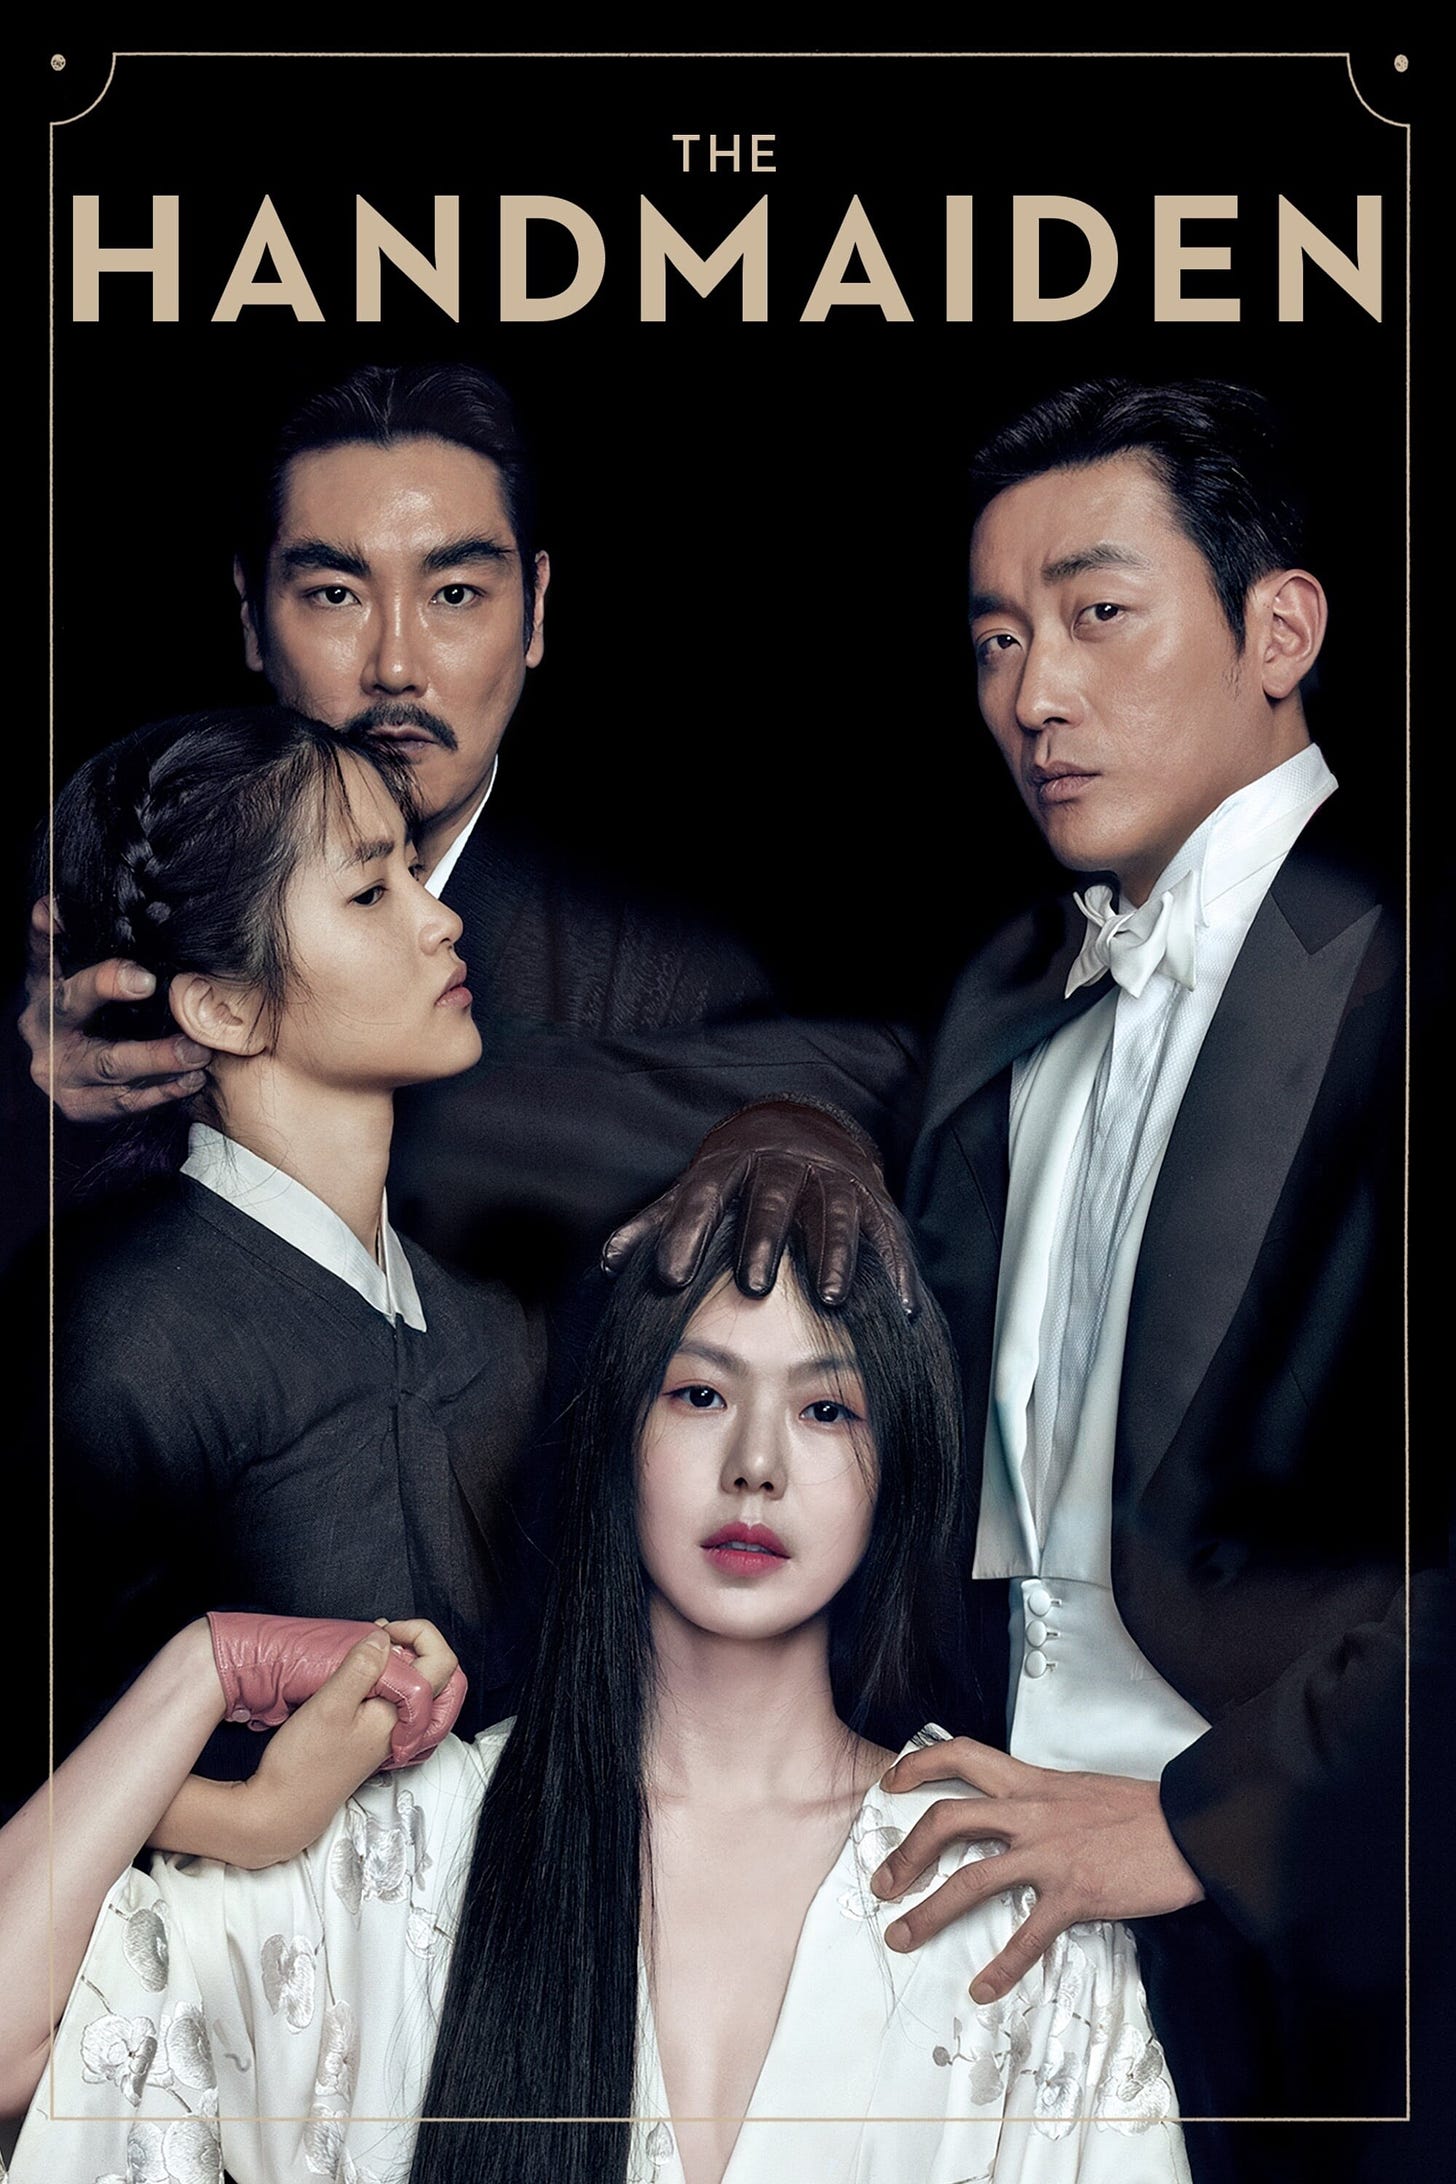 Movie poster for the Handmaiden, featuring the four Korean actors of the core cast in a dramatic tableau against a black background